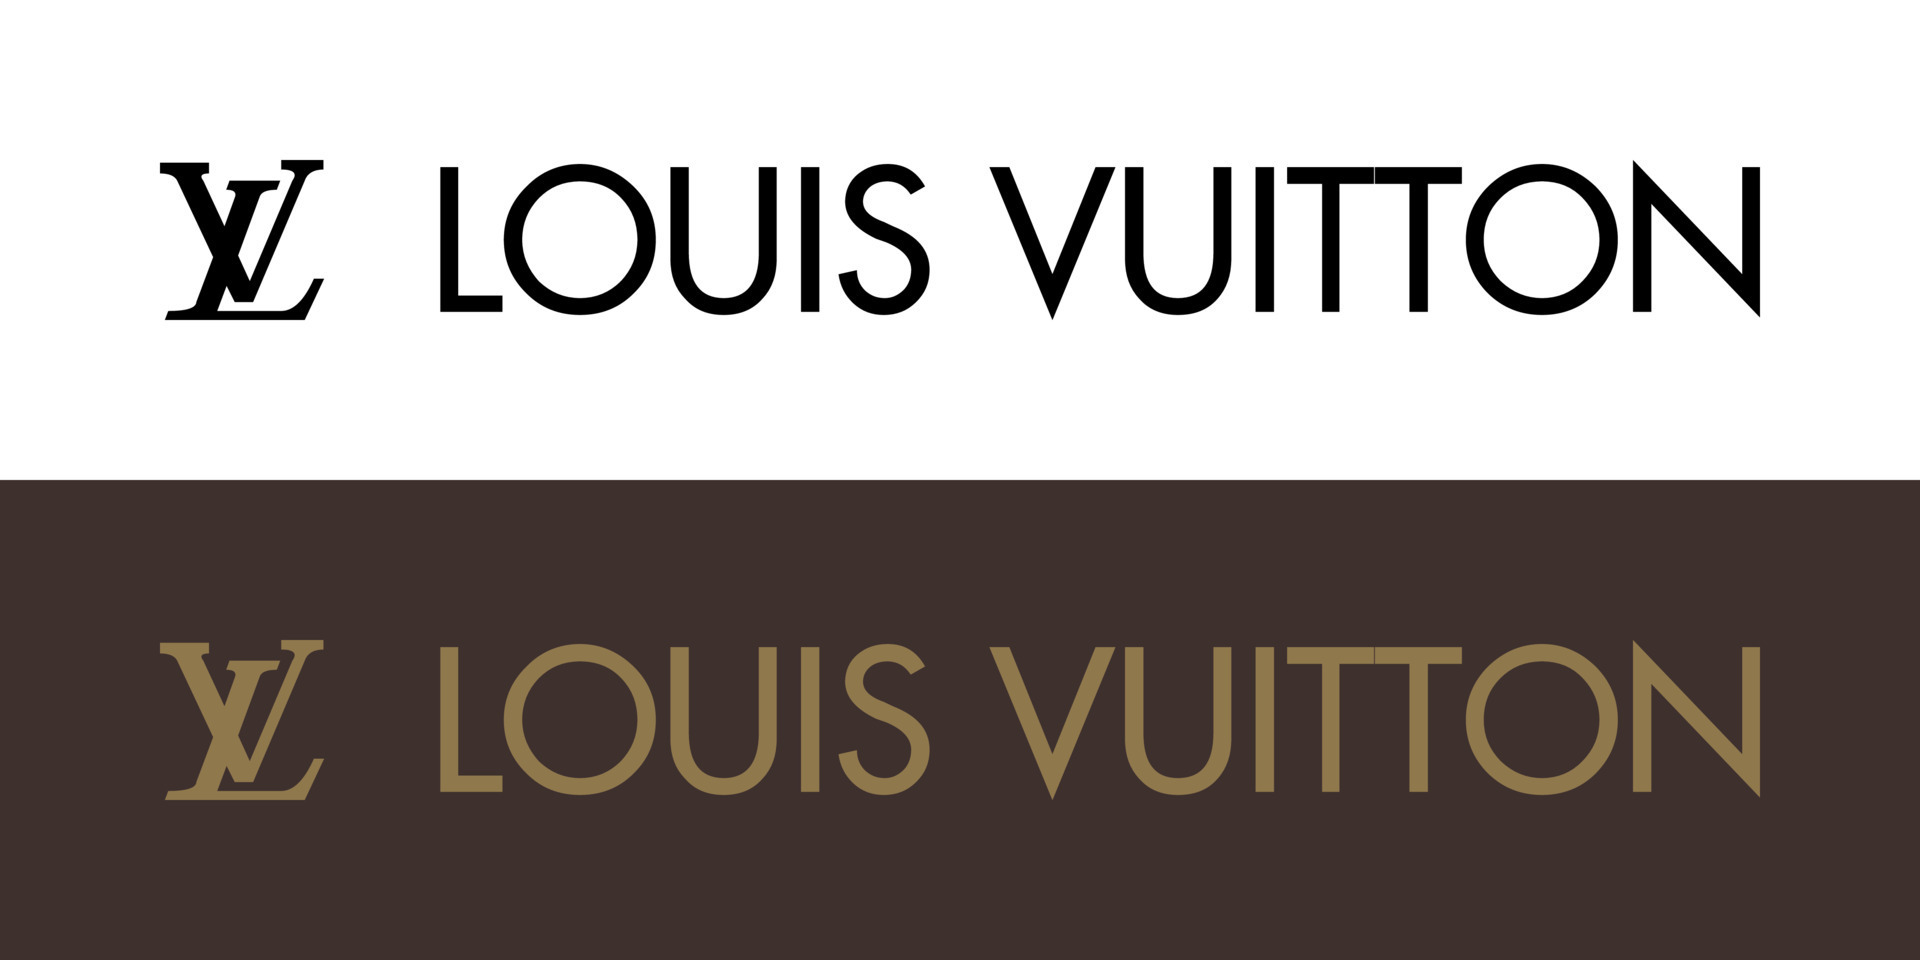 What's The Closest Thing To Louis Vuitton Font